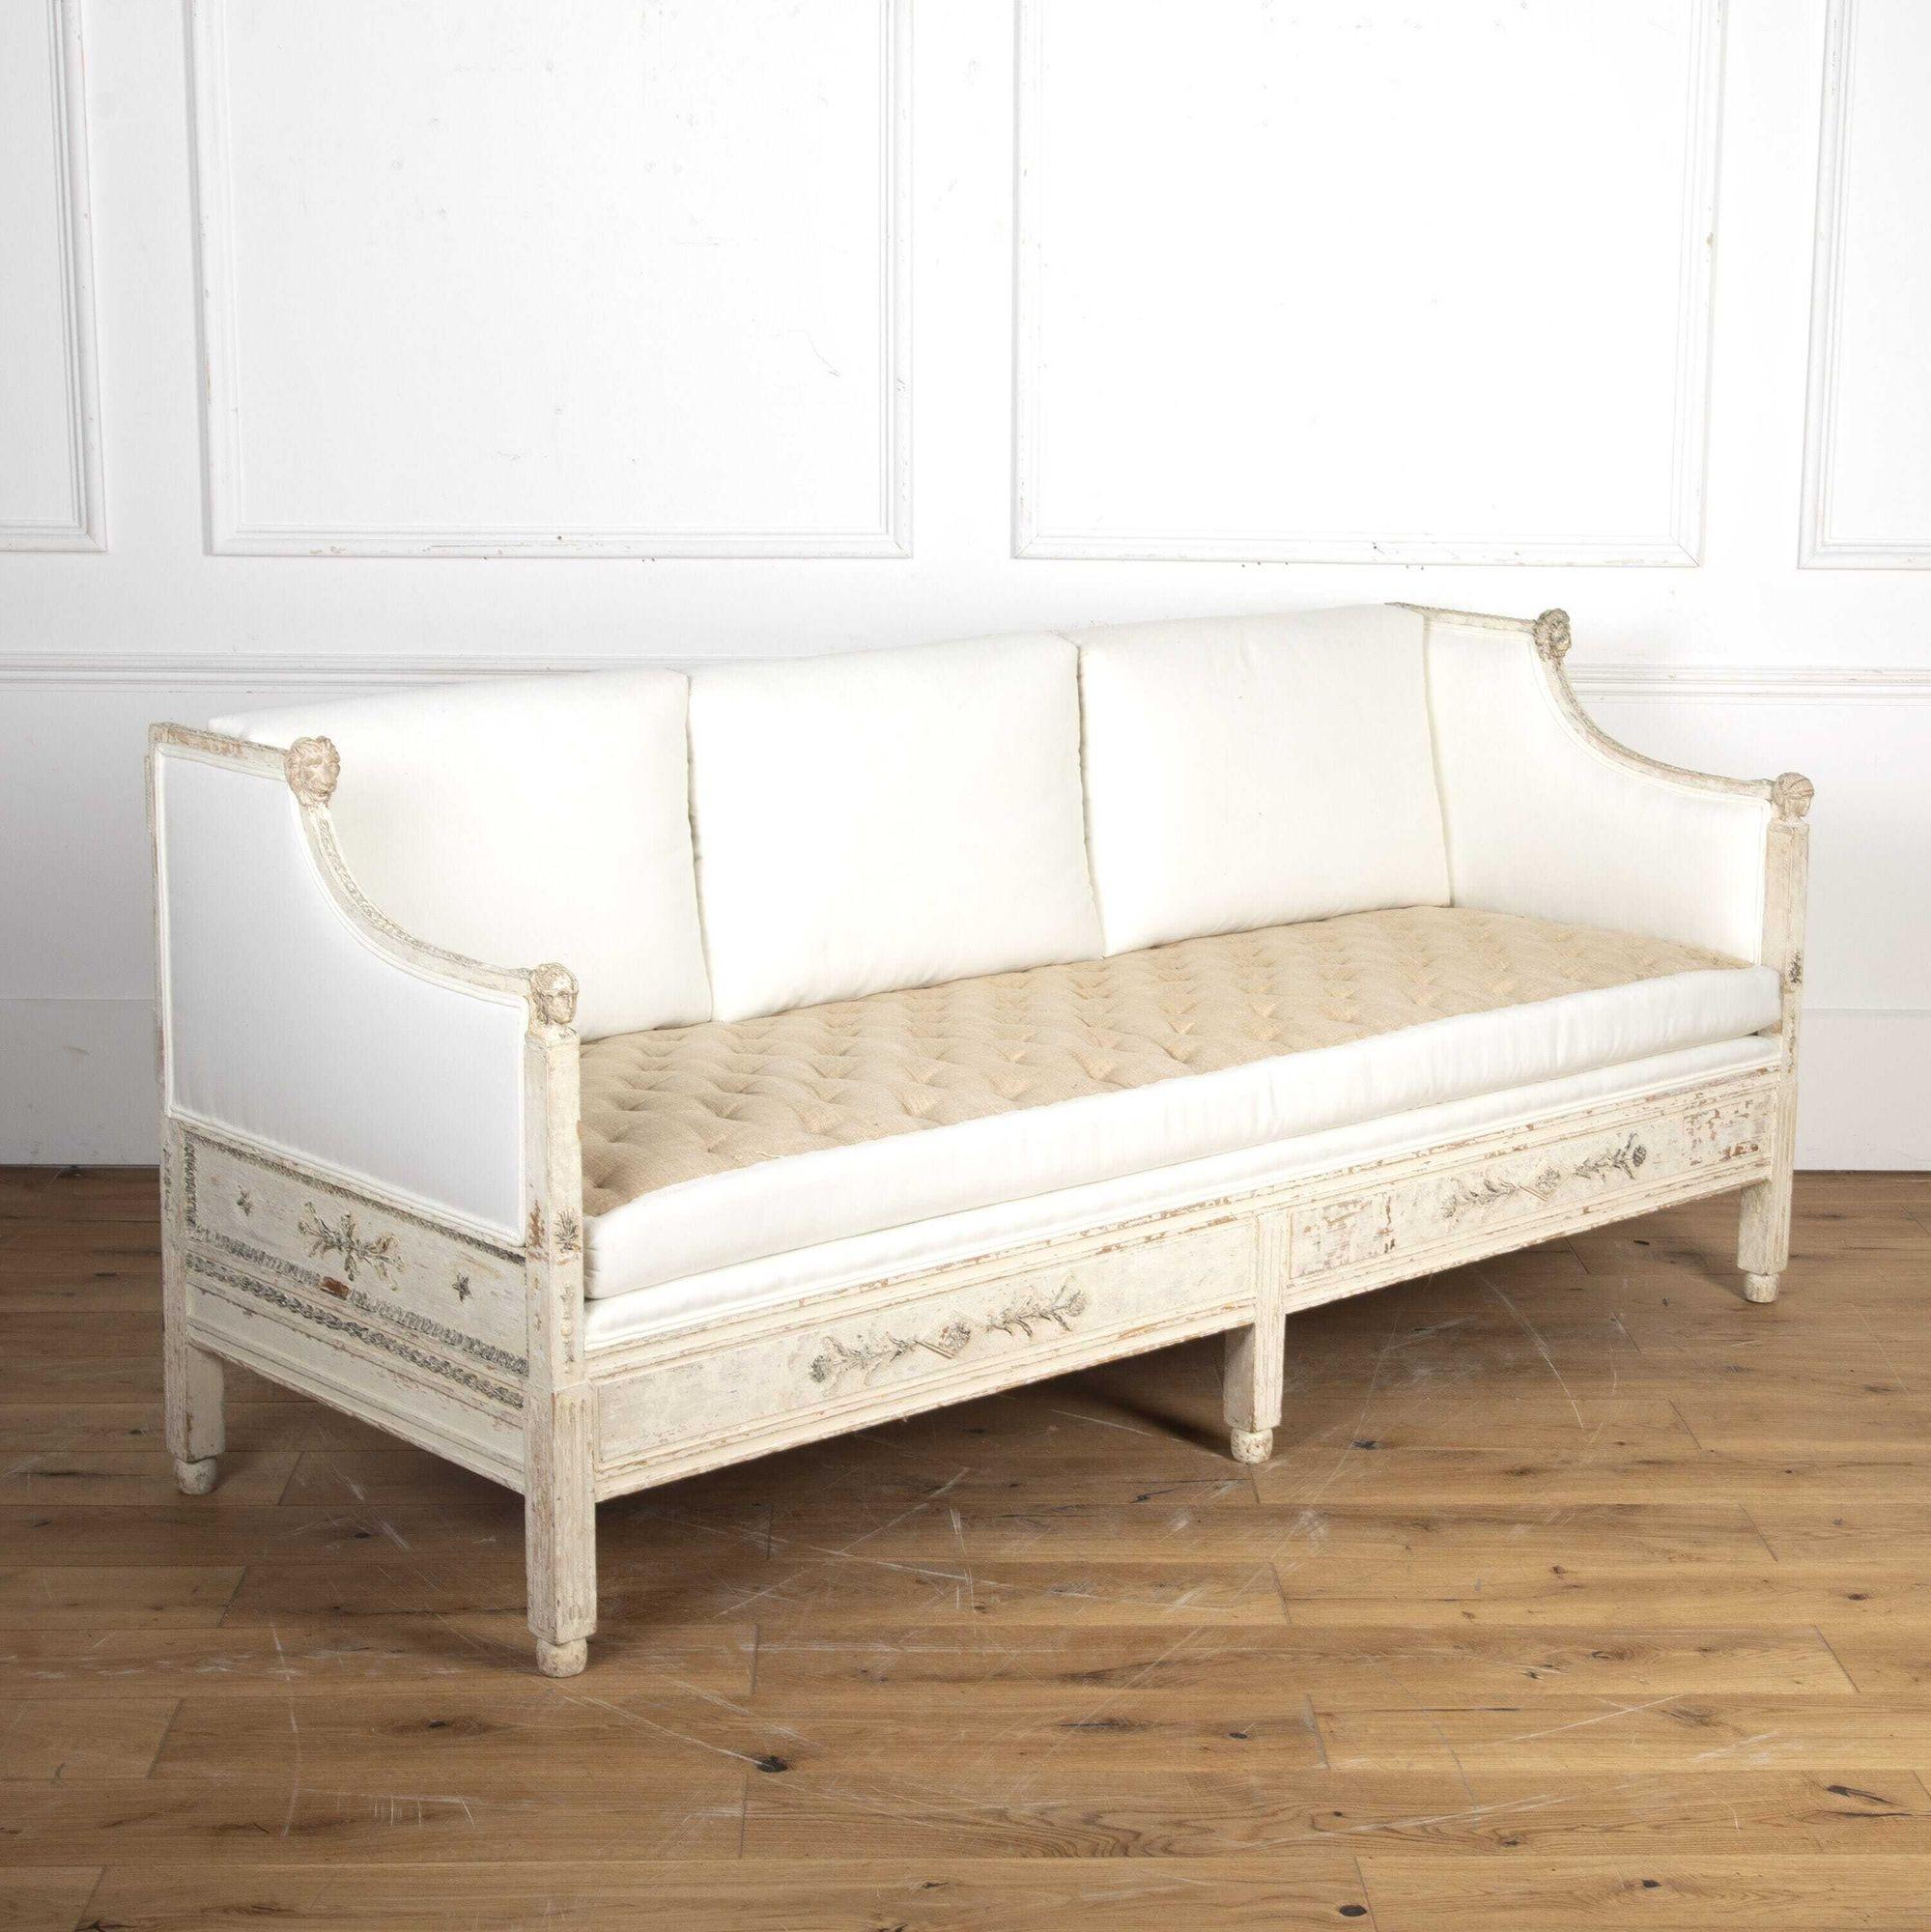 Gorgeous Swedish 18th Century Gustavian sofa.
This sofa is very much in the style of Ephraim Stahl of Stockholm (1768 -1820). Stahl was celebrated for his seating adorned with lion features. 
This piece has a refined neoclassical form with an